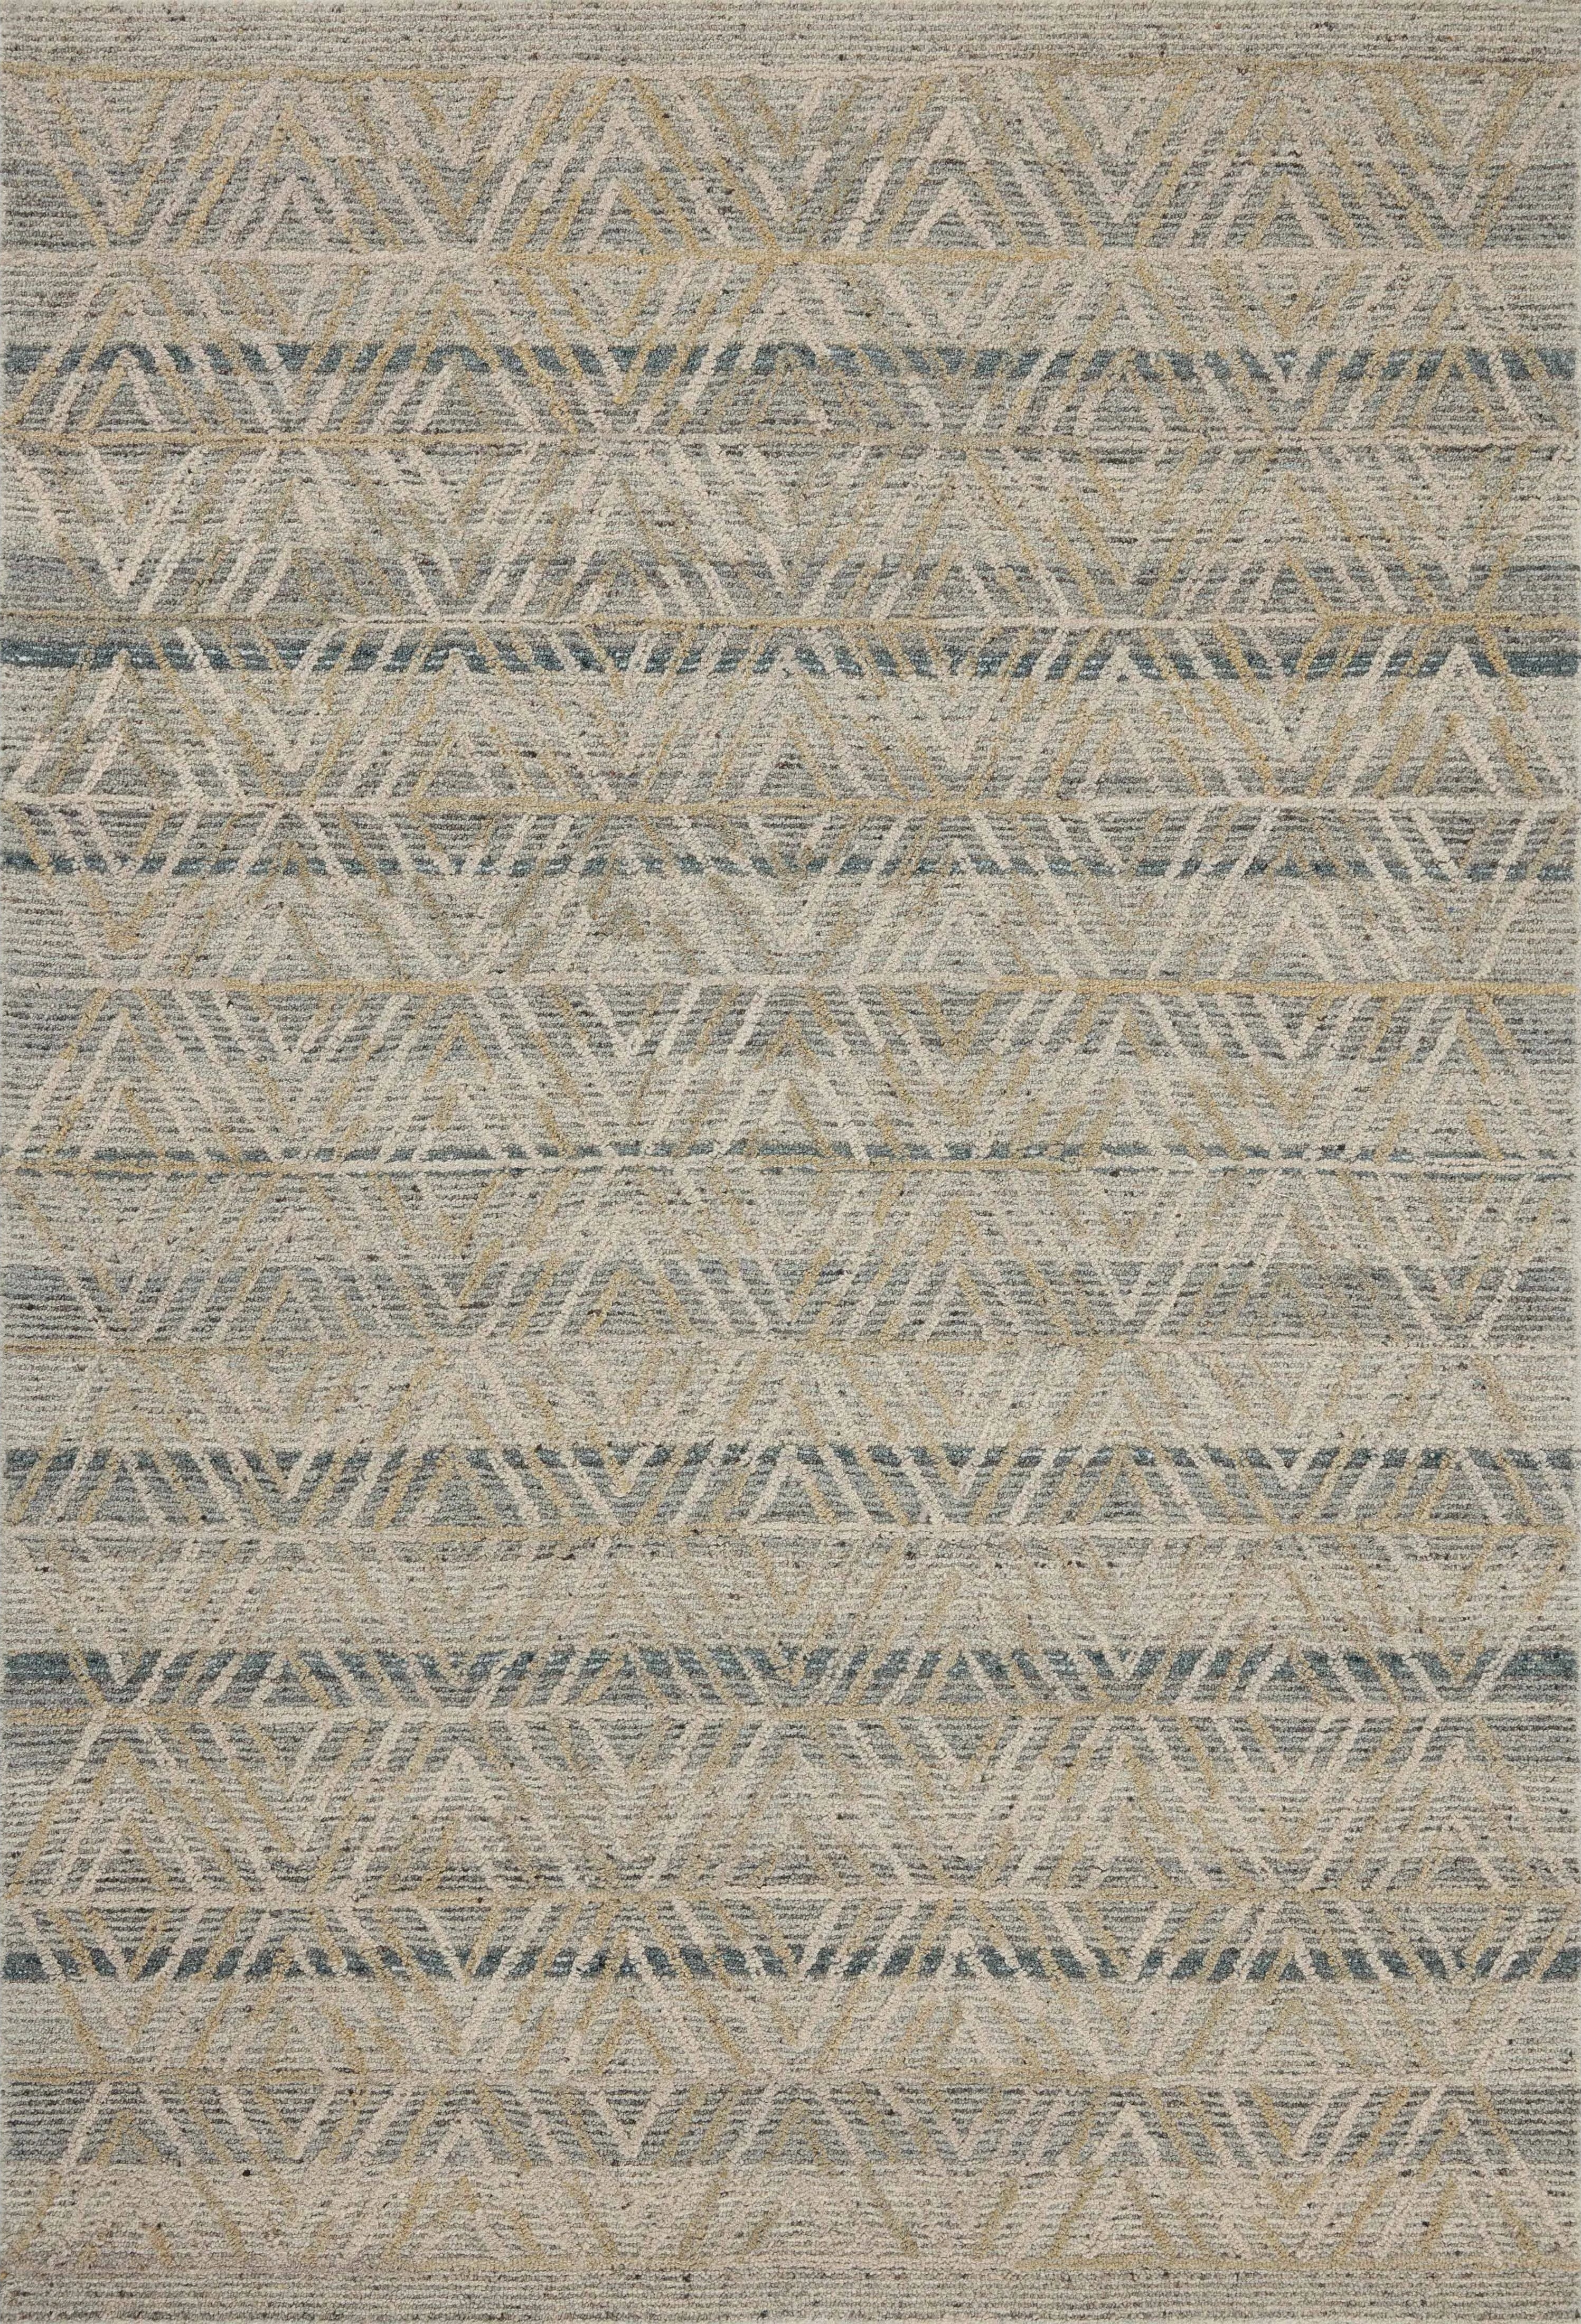 The Elias Fog / Natural Rug is a hand-tufted wool area rug with lively graphic patterns in earth and stone tones. There’s a unique texture to the rug made by over-tufting, in which a design is hand-tufted over a tufted base, creating a subtle high-low pile. Amethyst Home provides interior design, new home construction design consulting, vintage area rugs, and lighting in the Monterey metro area.